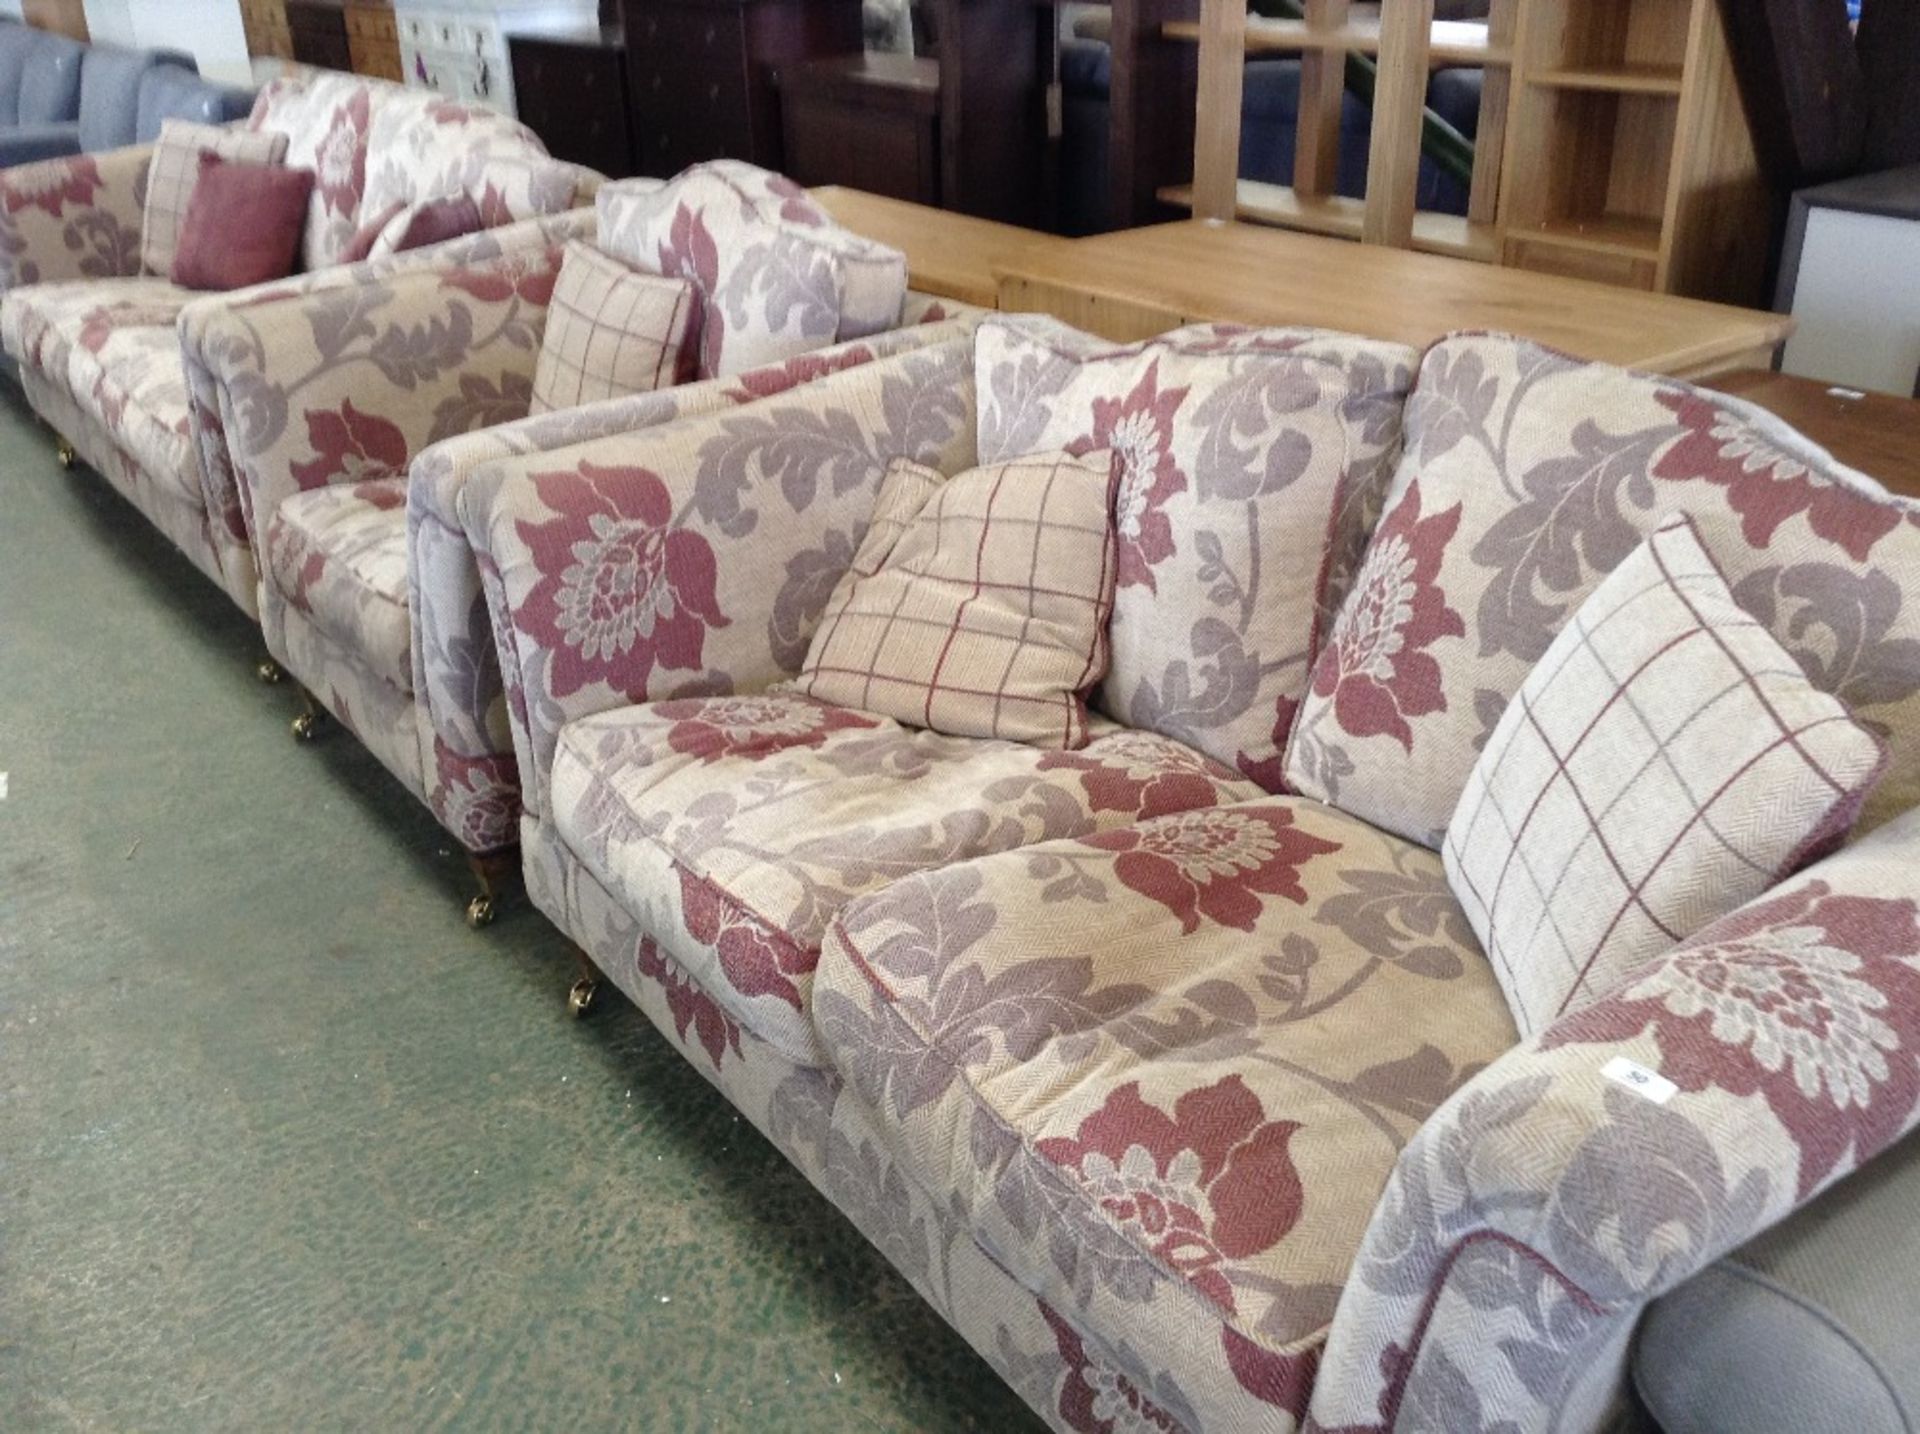 NATURAL AND RED FLORAL PATTERNED 3 SEATER SOFA, 2